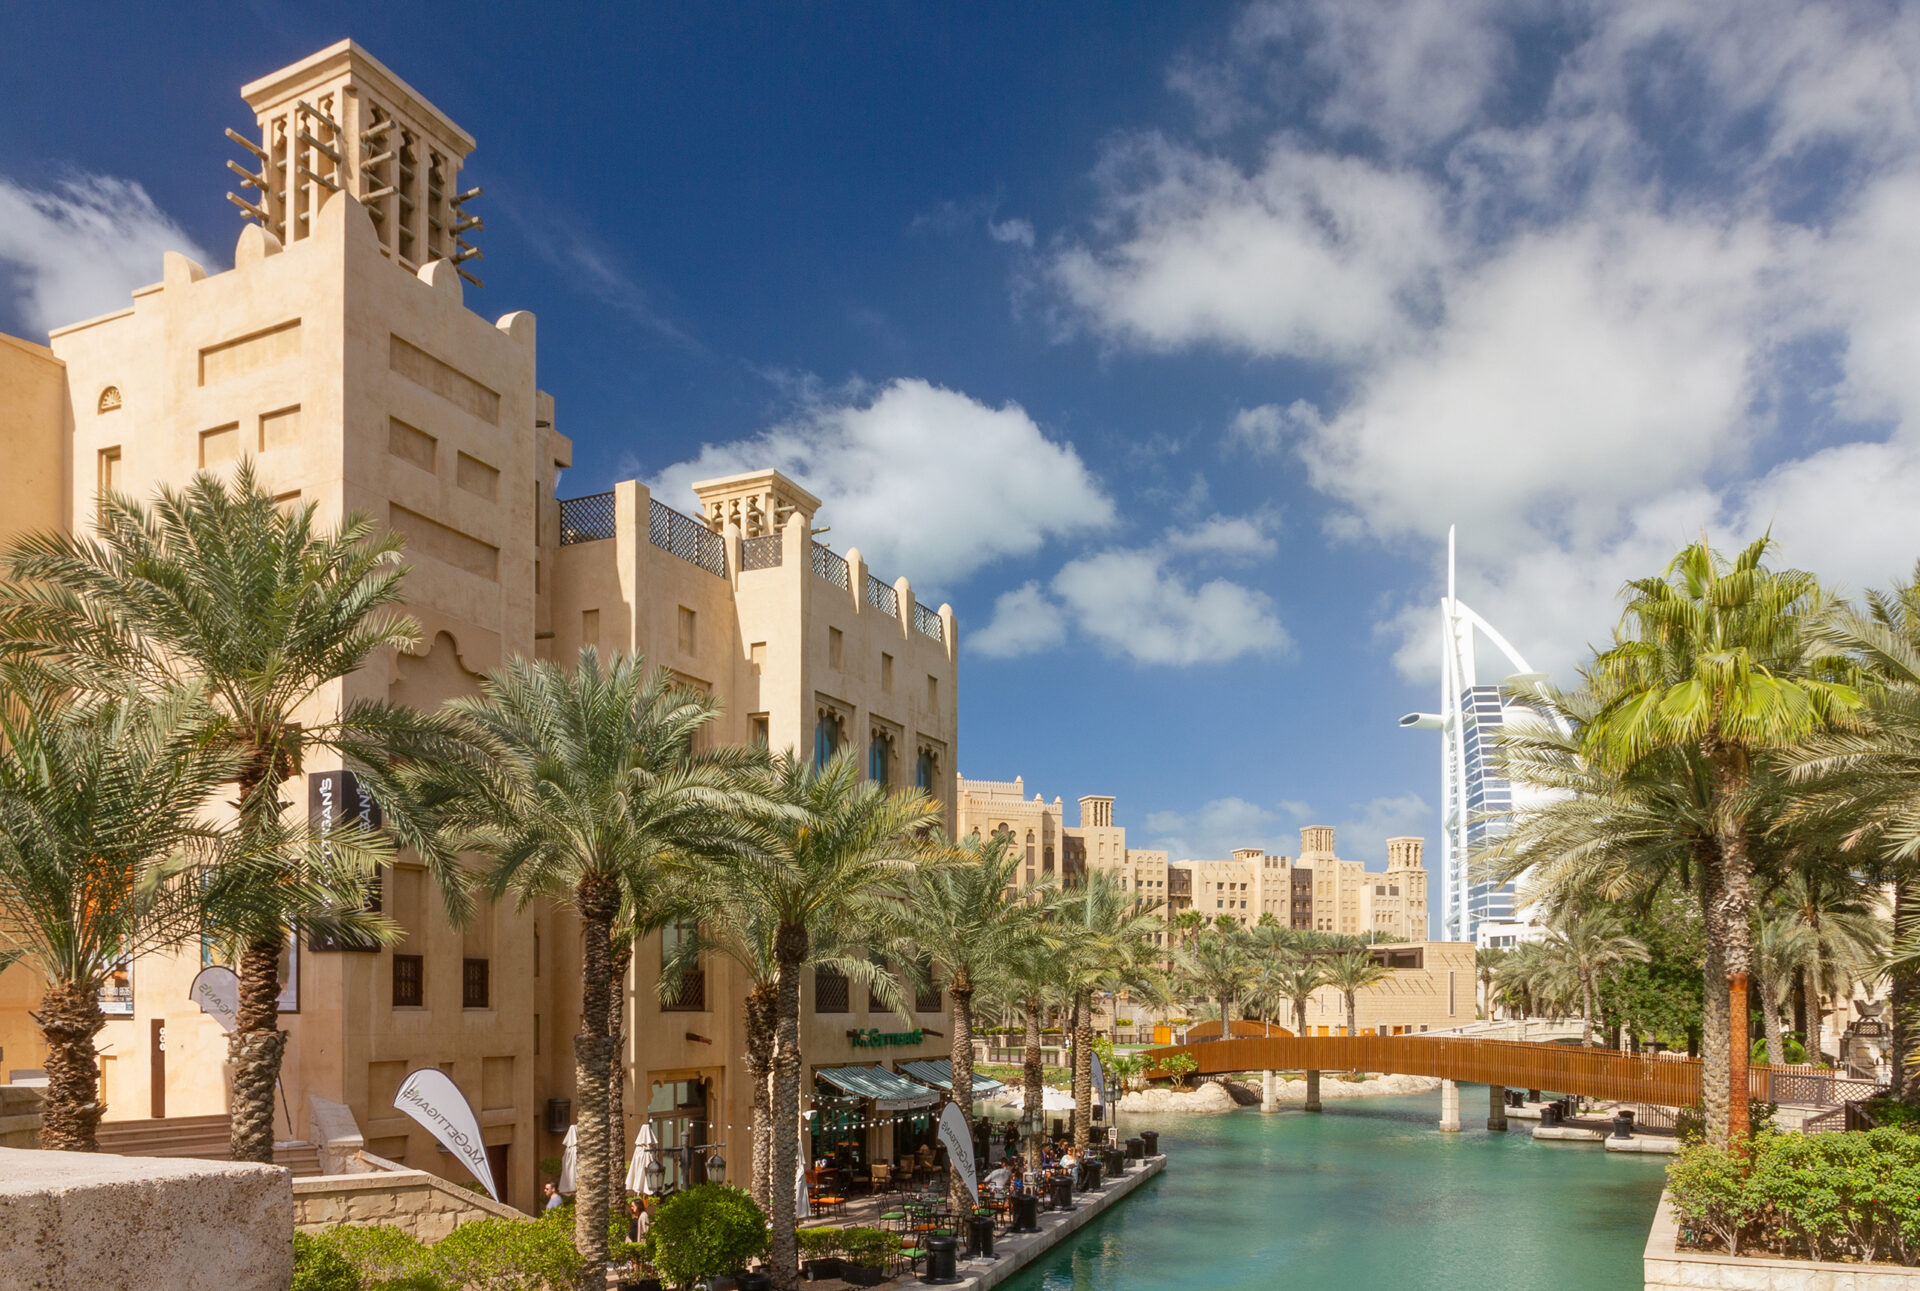 Madinat Jumeirah in Dubai, where the World Governments Summit is taking place. (iStock)